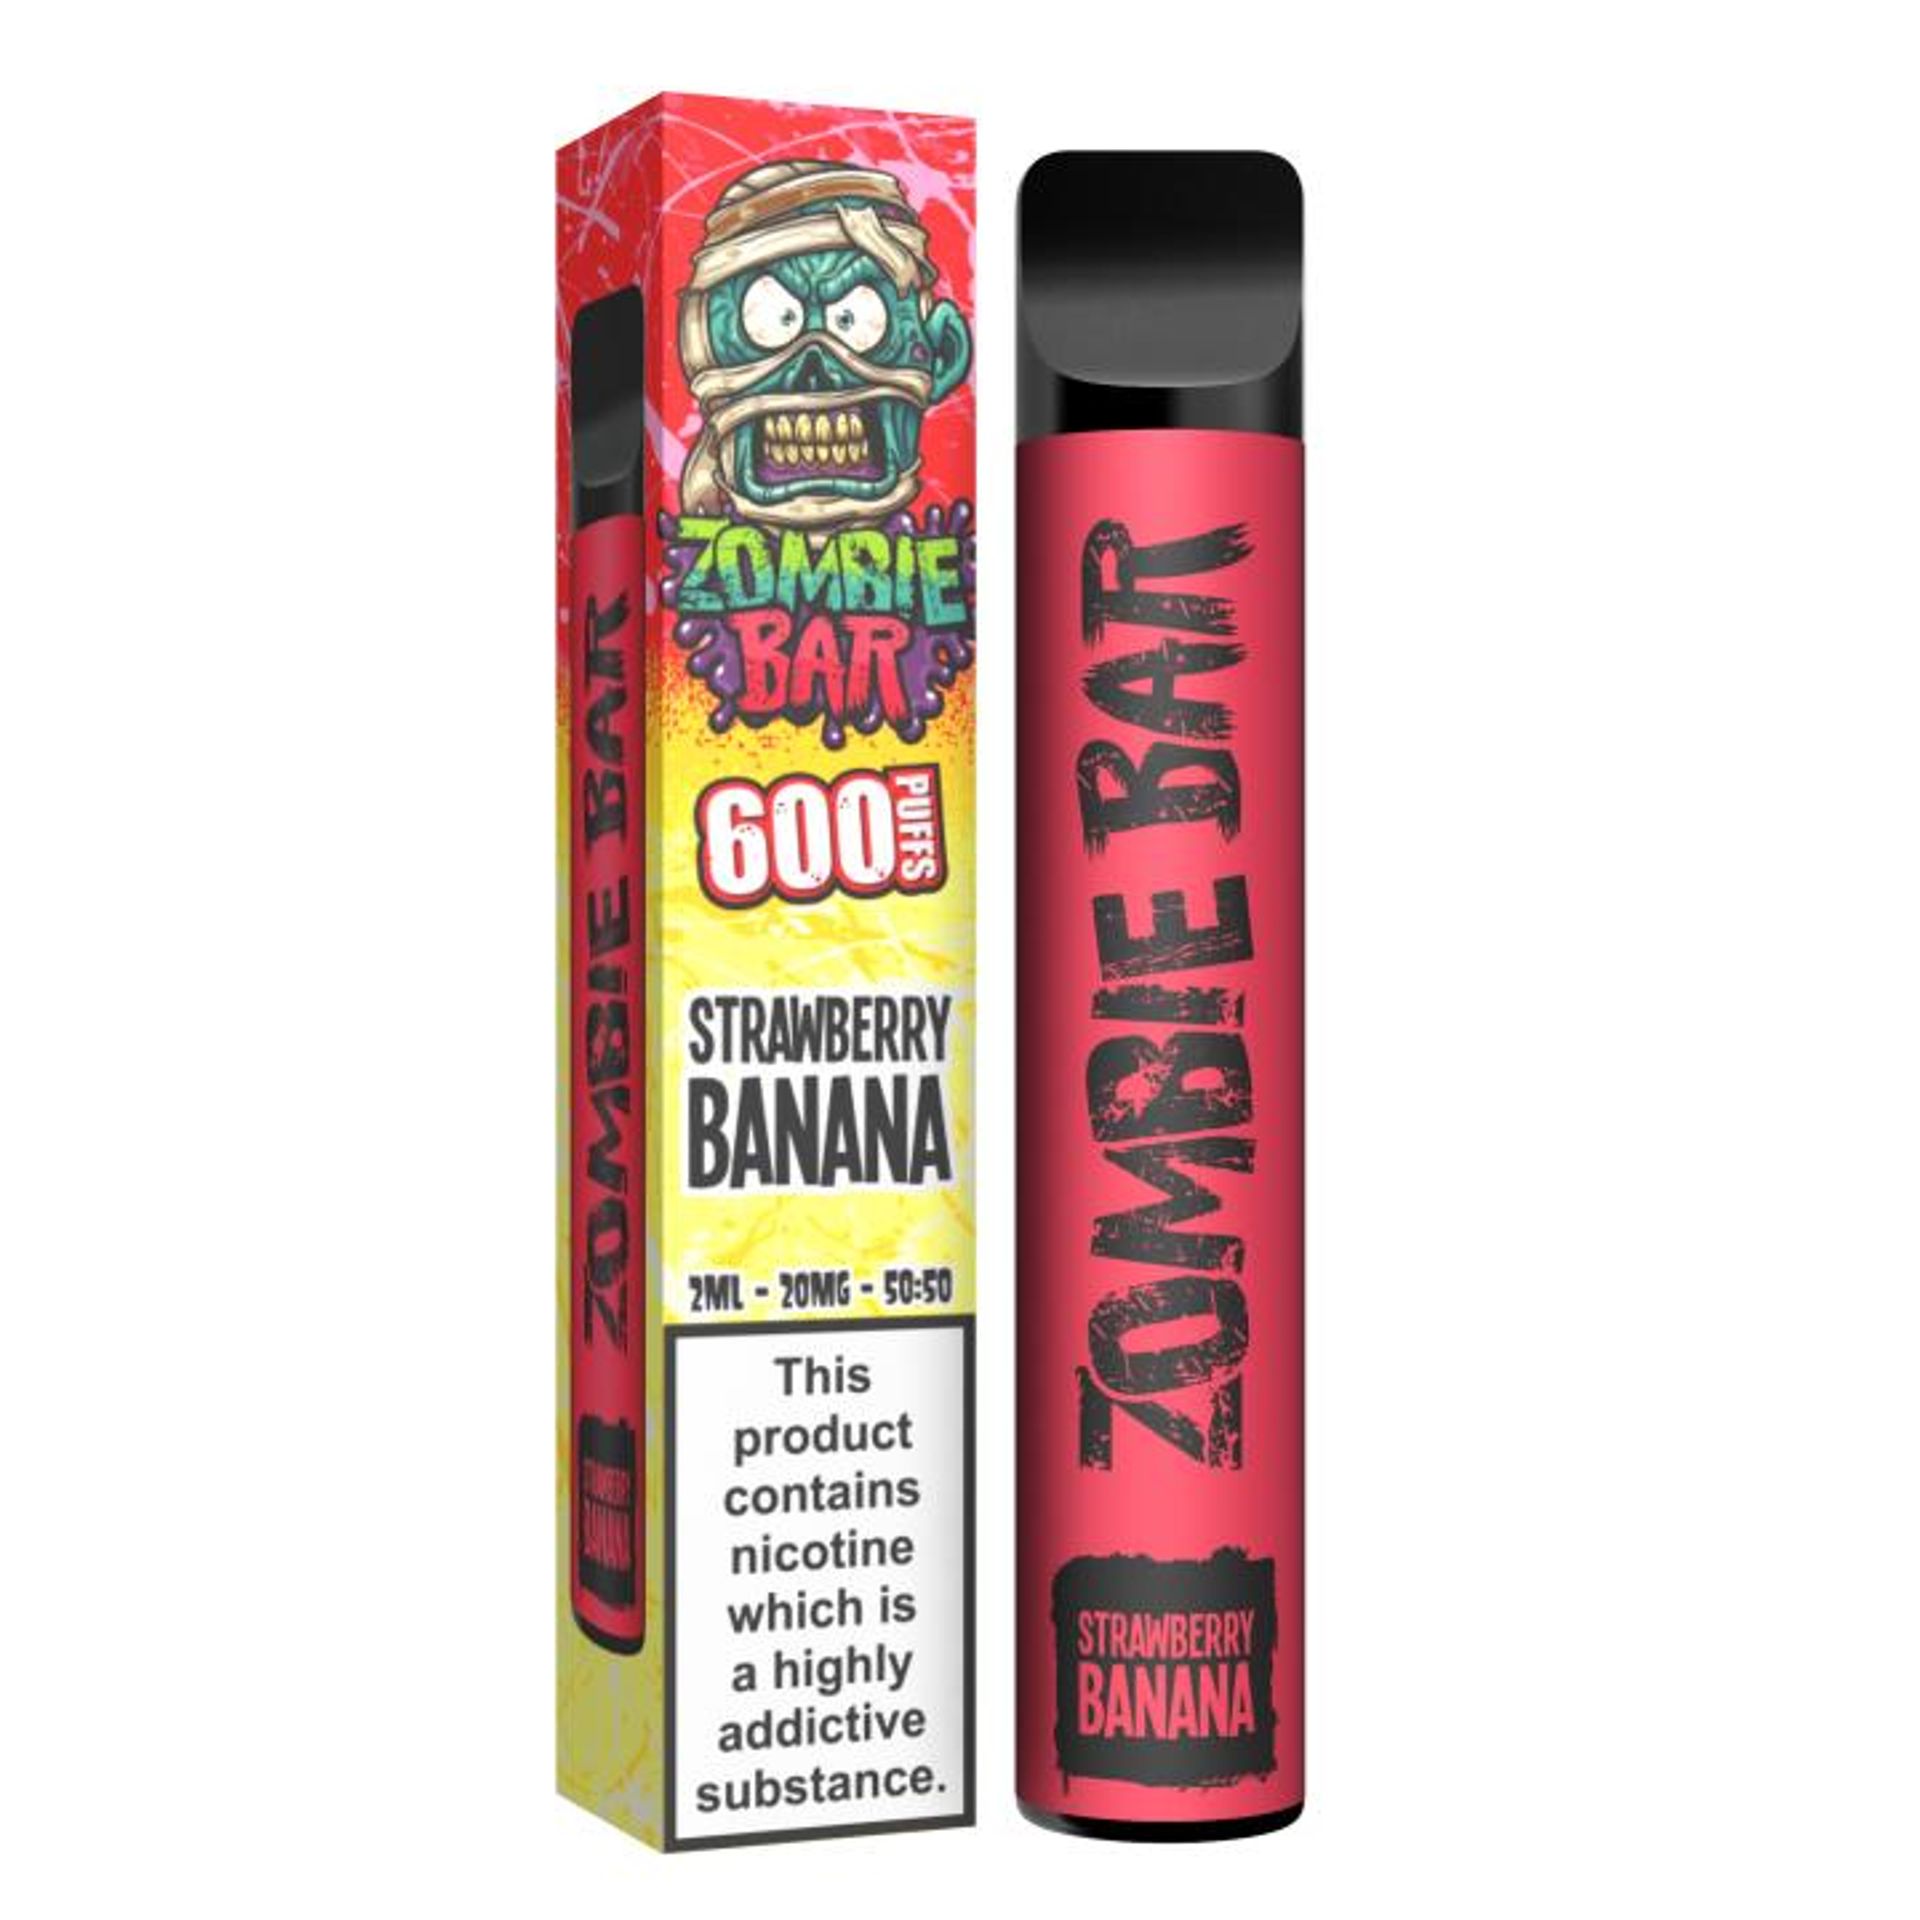 Image of Strawberry Banana by Zombie Bar